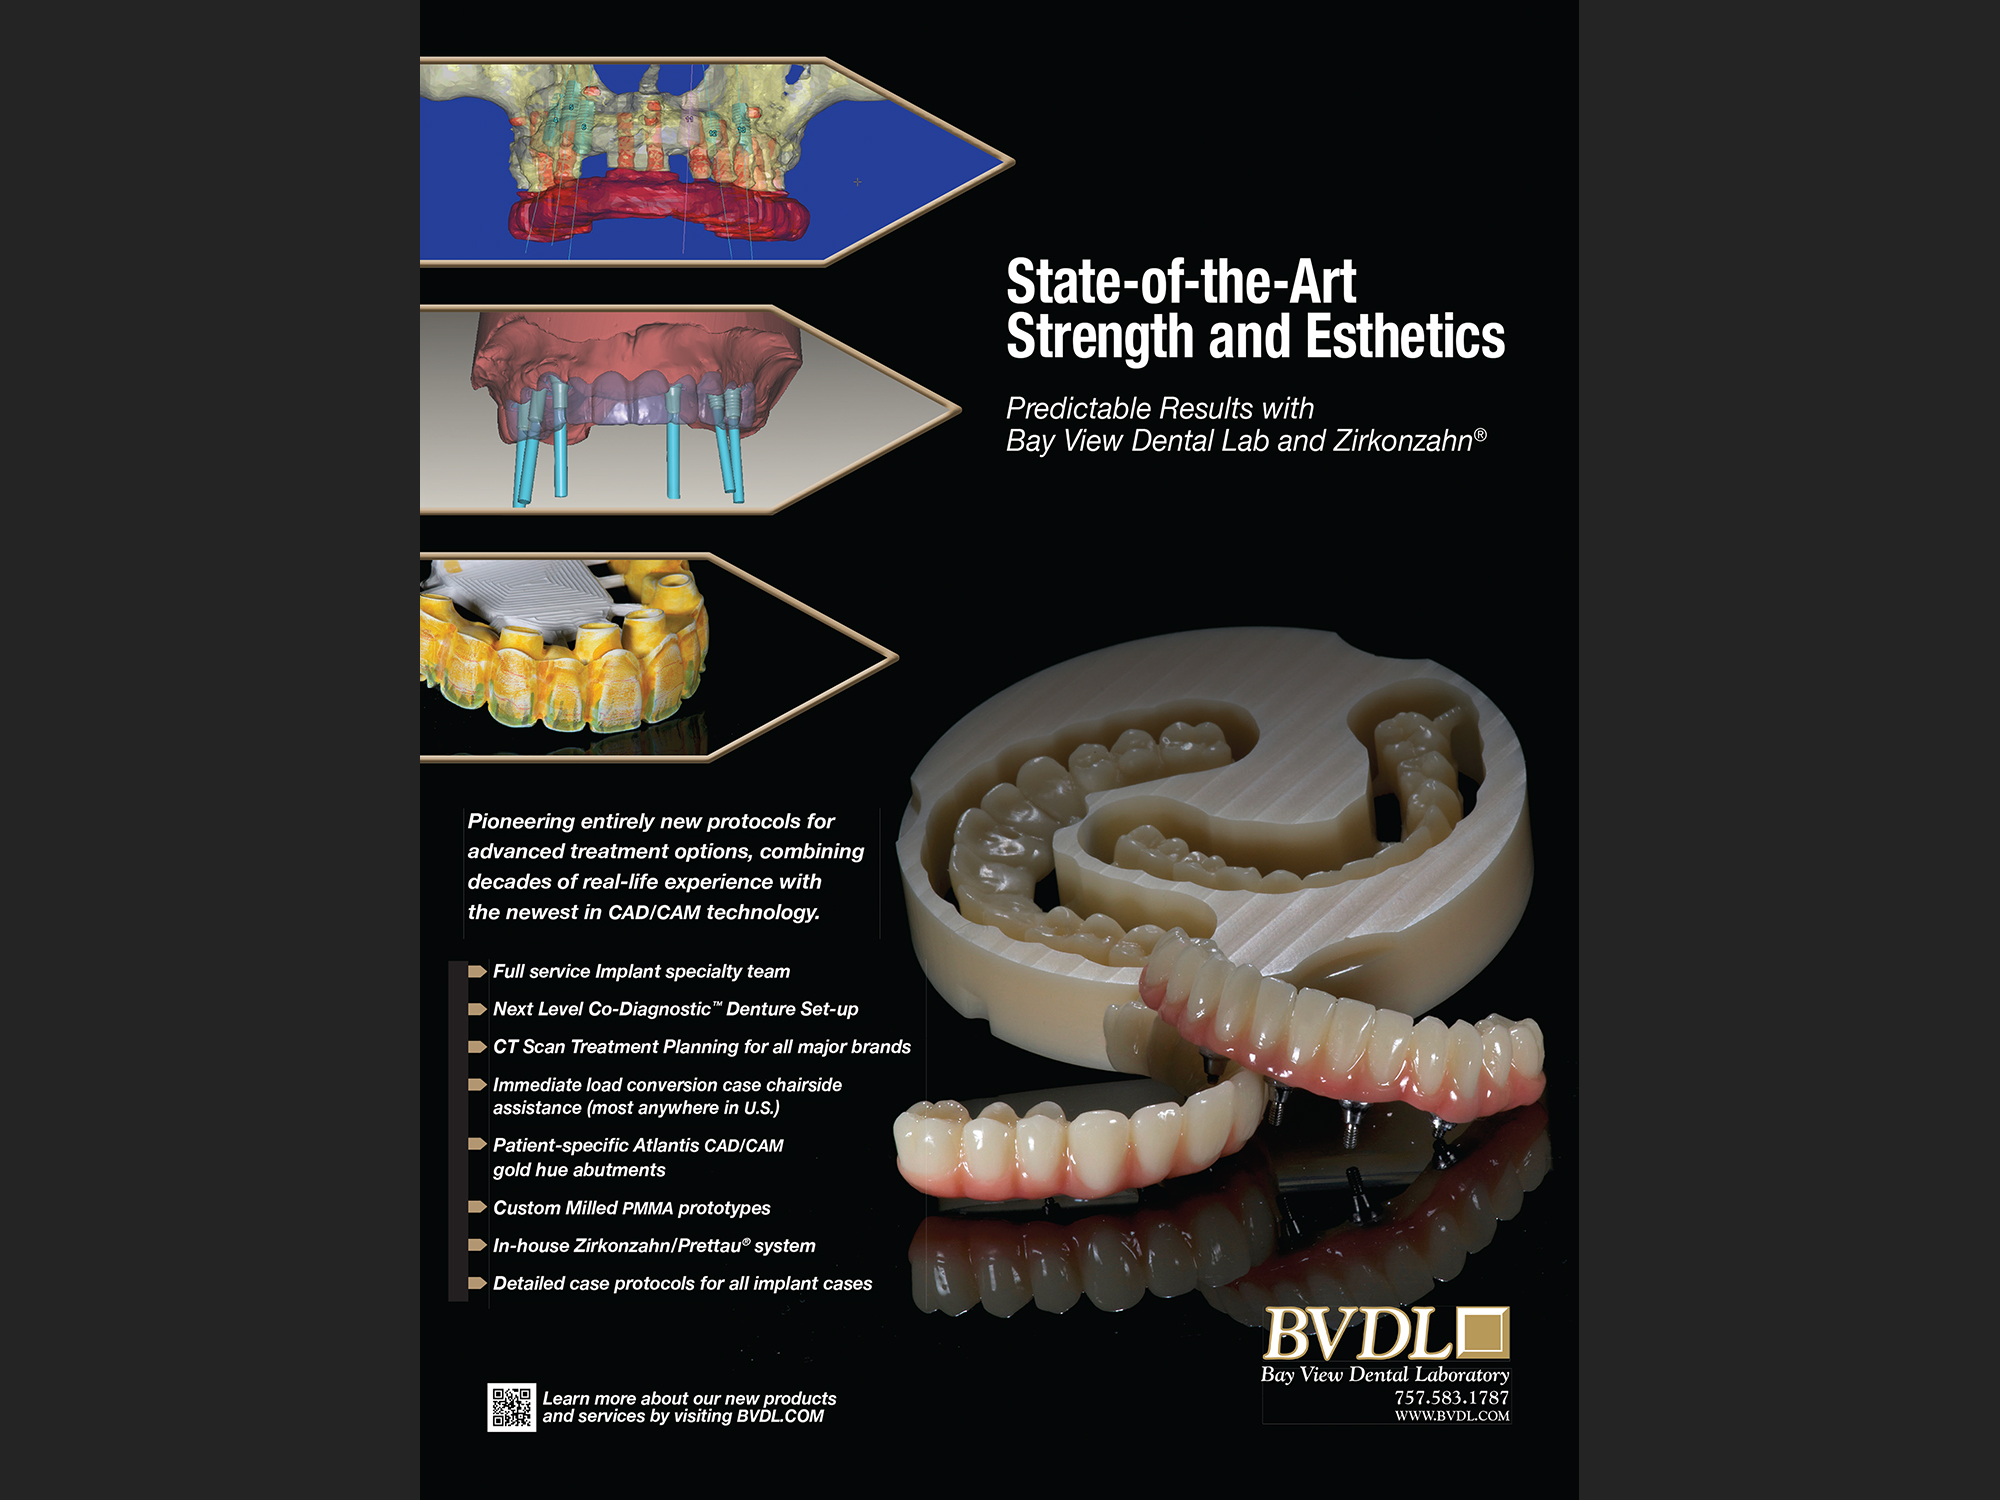 "State-of-the-Art Strength and Esthetics: Bay View Dental Lab", 2014; full page for trade magazine.